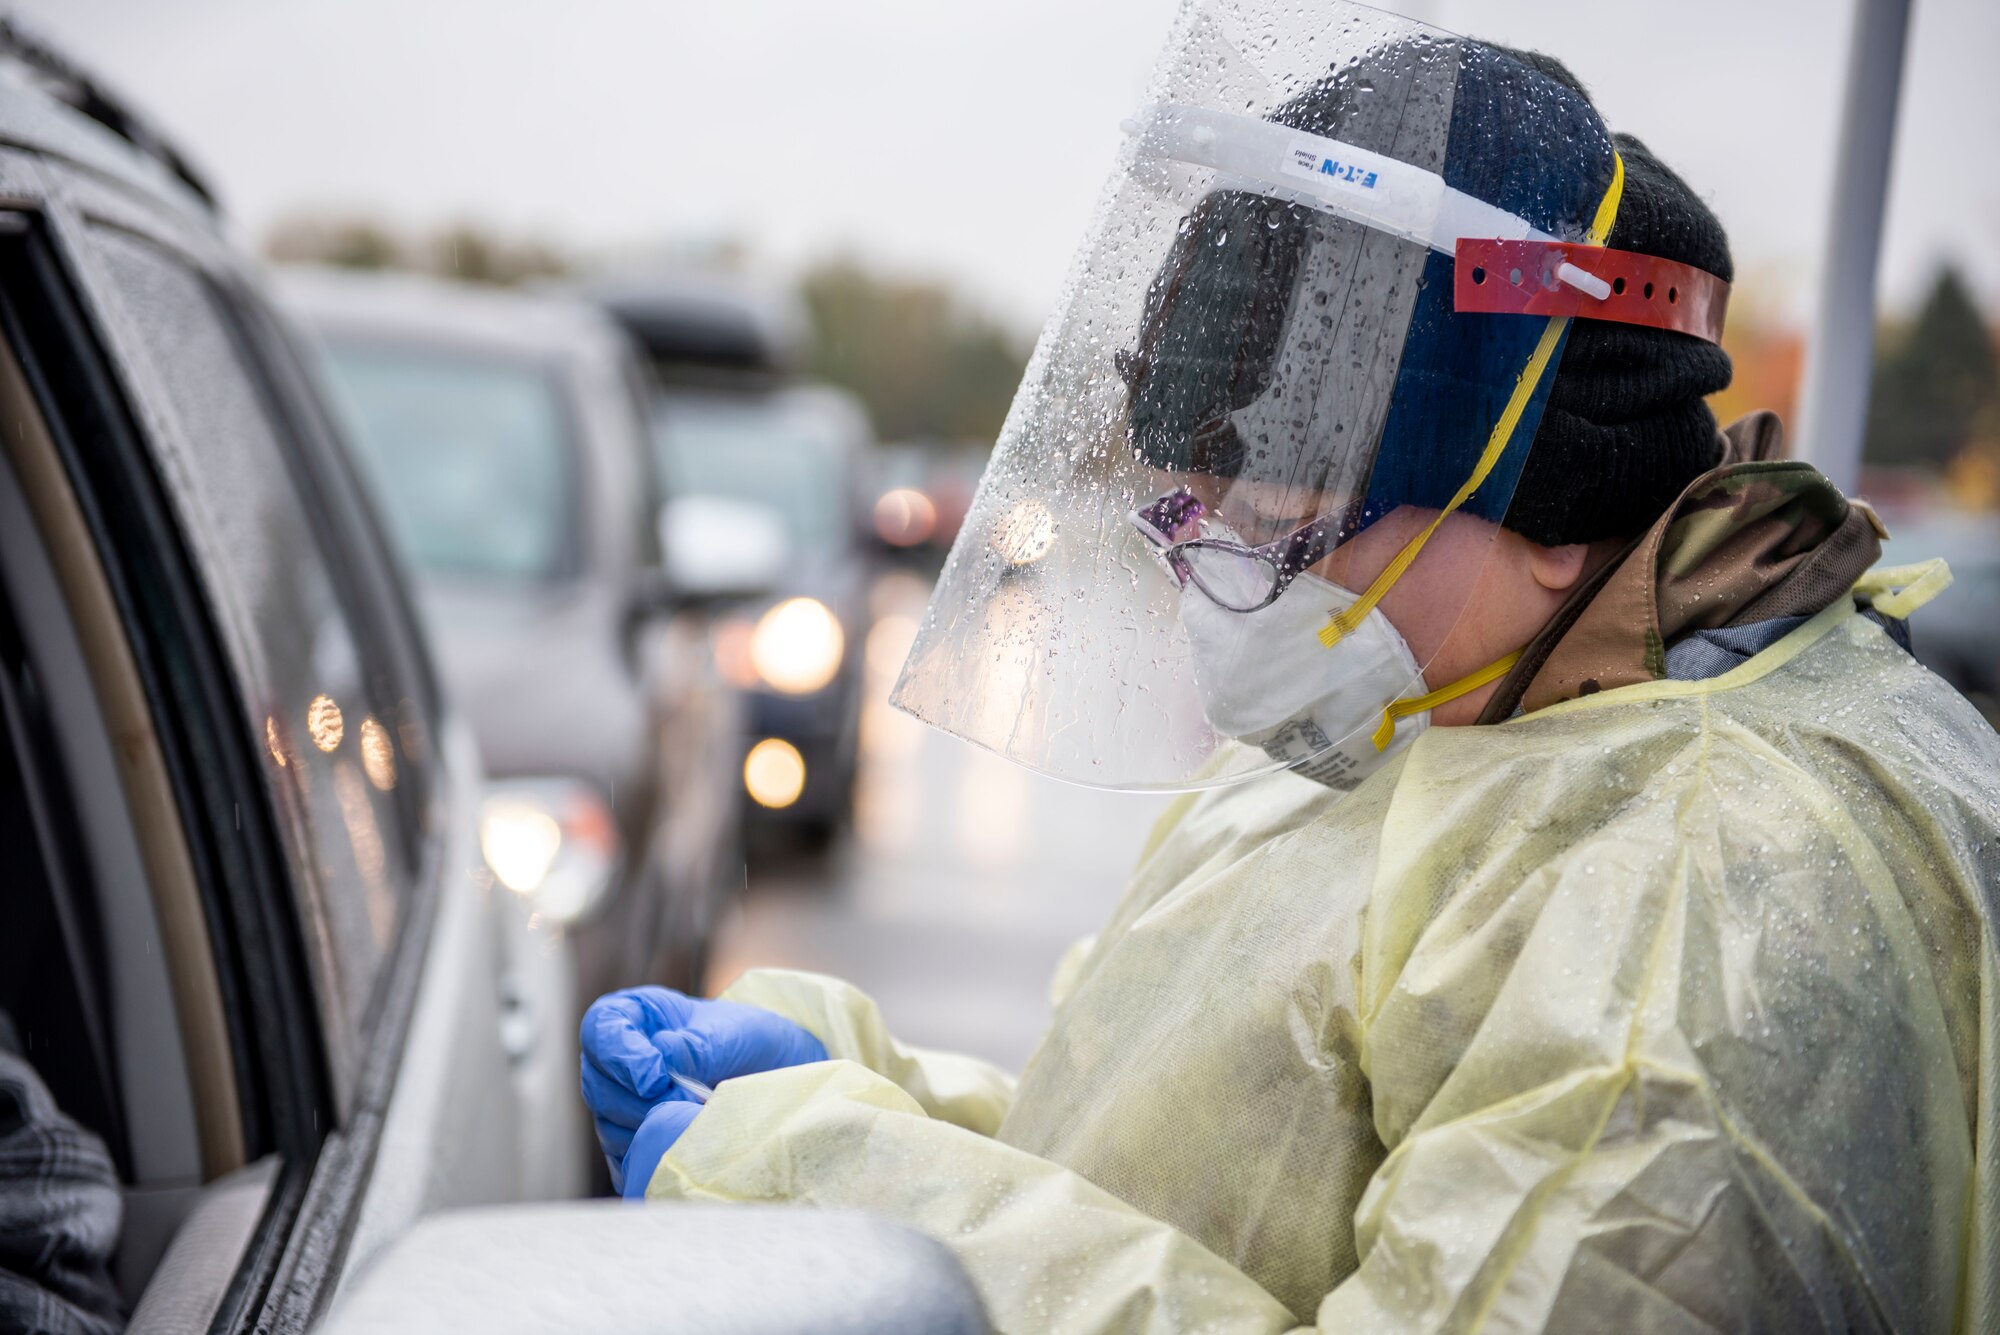 Pfc. Lisa Meabon, a Soldier assigned to the Ohio Military Reserve, conducts a COVID-19 test during a pop-up testing drive-thru at Anthony Wayne Junior High School in Whitehouse, Ohio, Oct. 19, 2020.